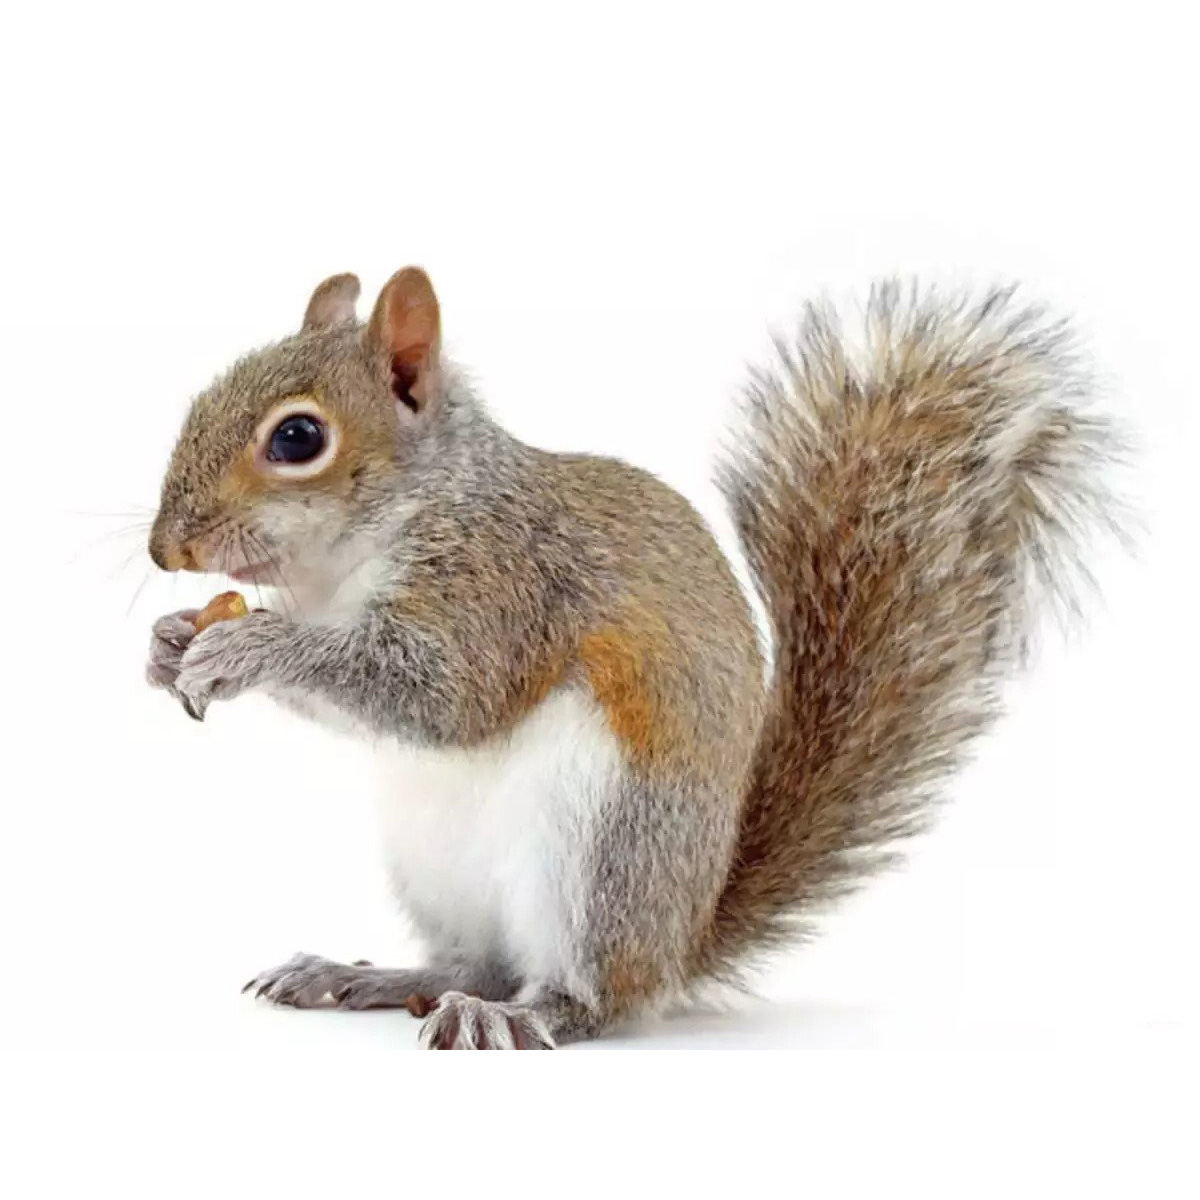 Expert Squirrel Removal Services in Buffalo, NY - Nuisance No More